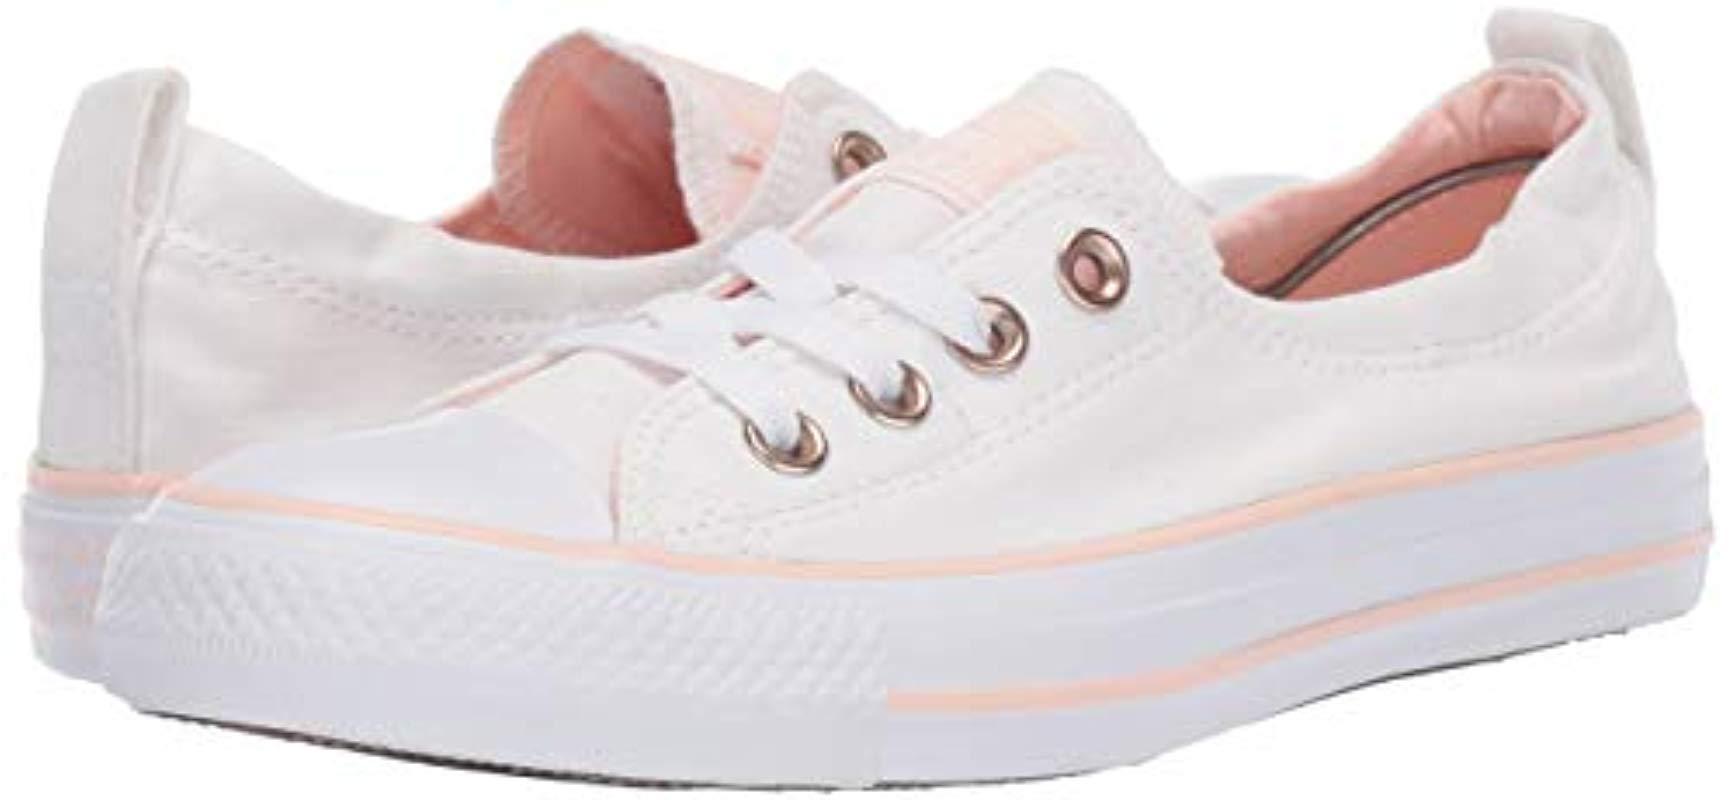 Converse Chuck Taylor All Star Shoreline Linen Slip On Sneaker in  White/Washed Coral/White (White) | Lyst